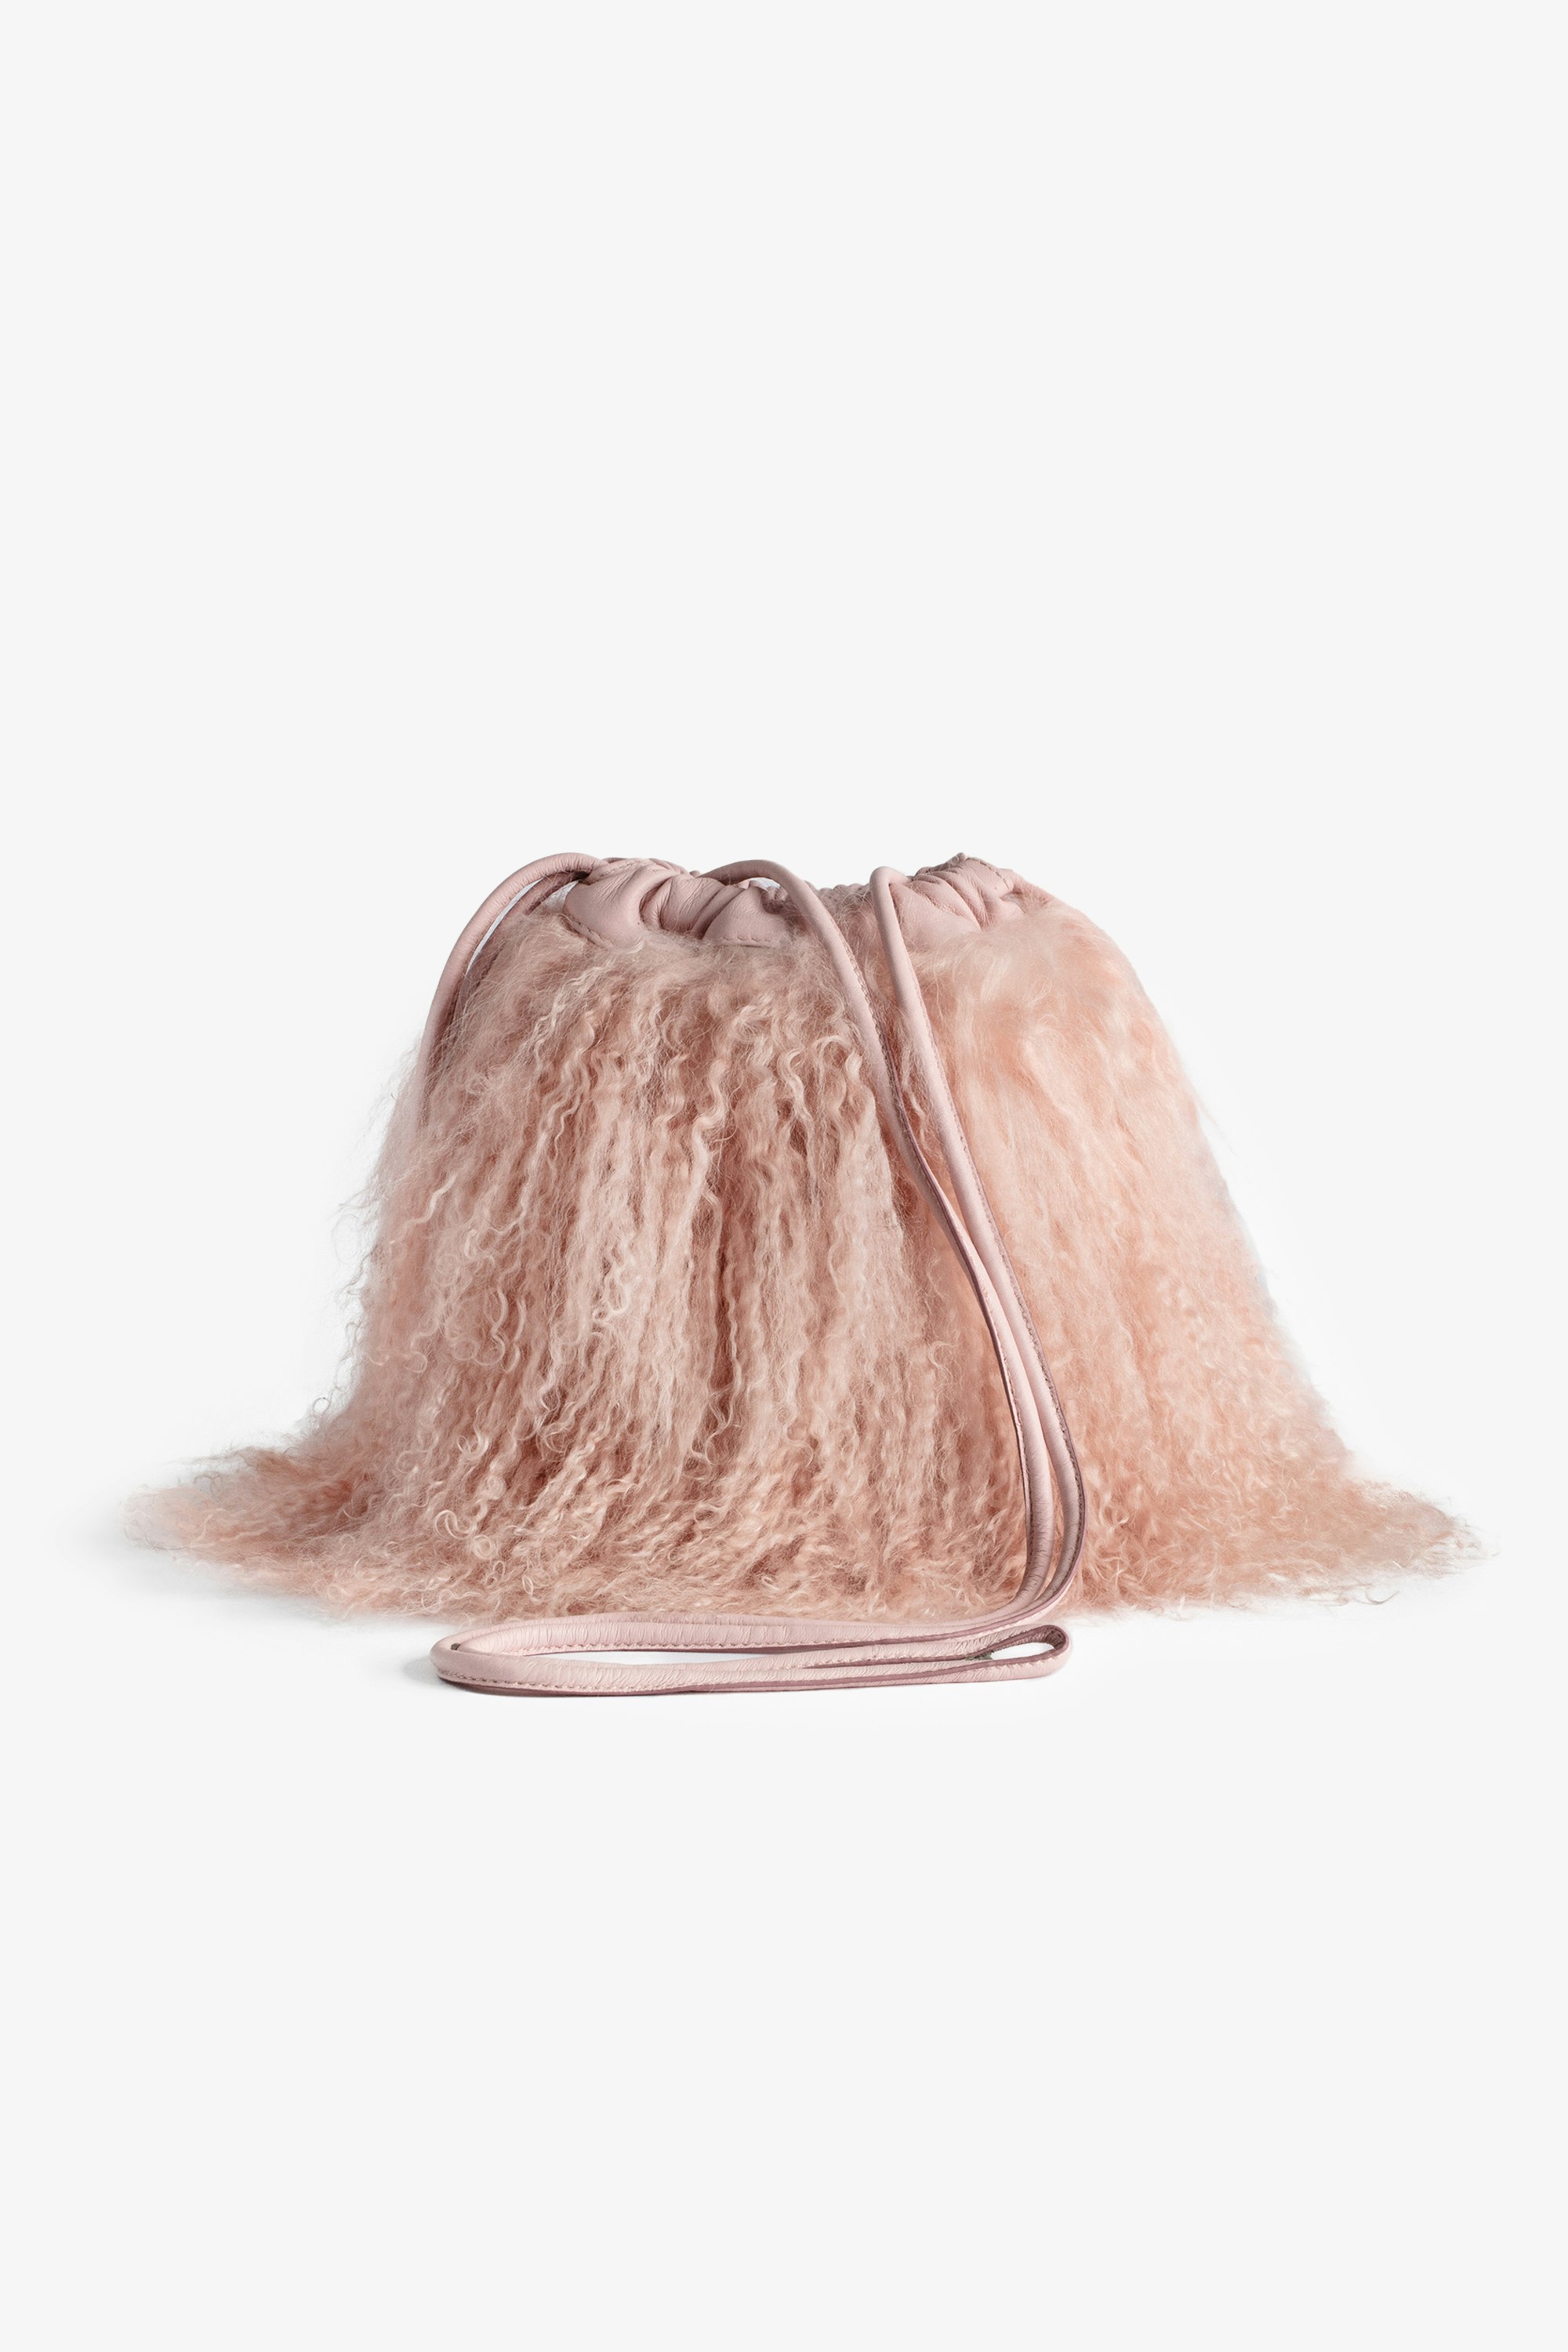 Rock To Go Frenzy Shearling Bag - Women’s small bucket bag in pink shearling leather with drawstring and shoulder strap.